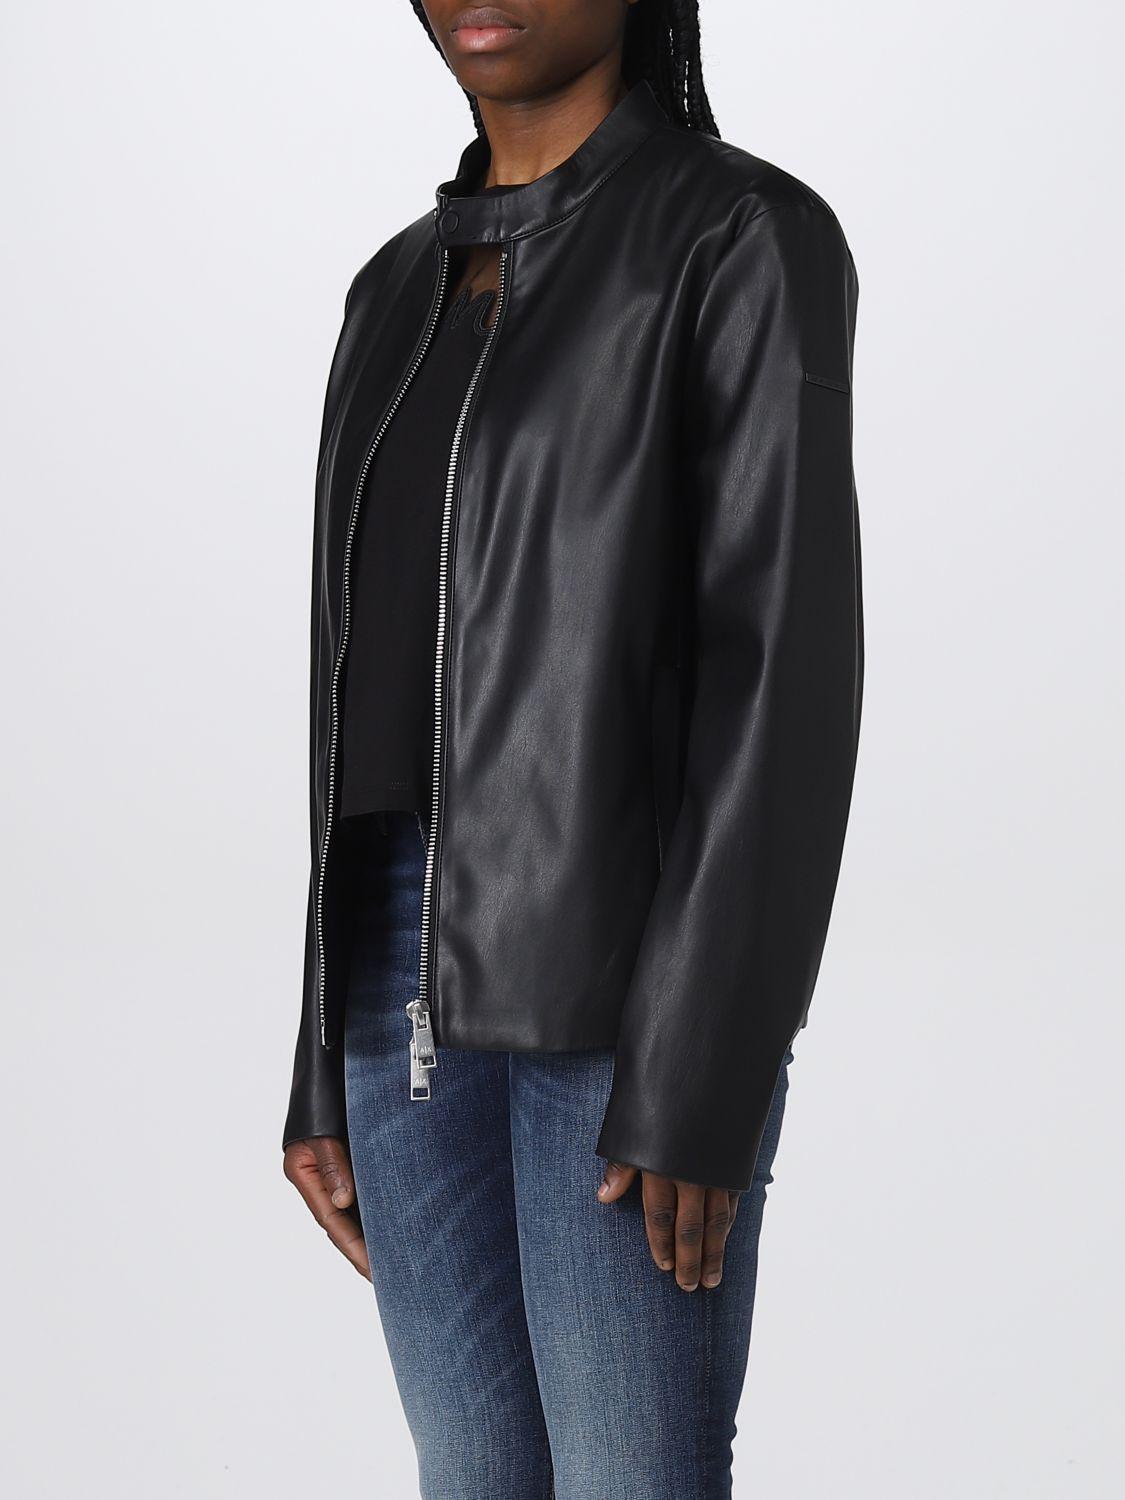 Armani Exchange Faux Leather Jacket in Black for Men | Lyst